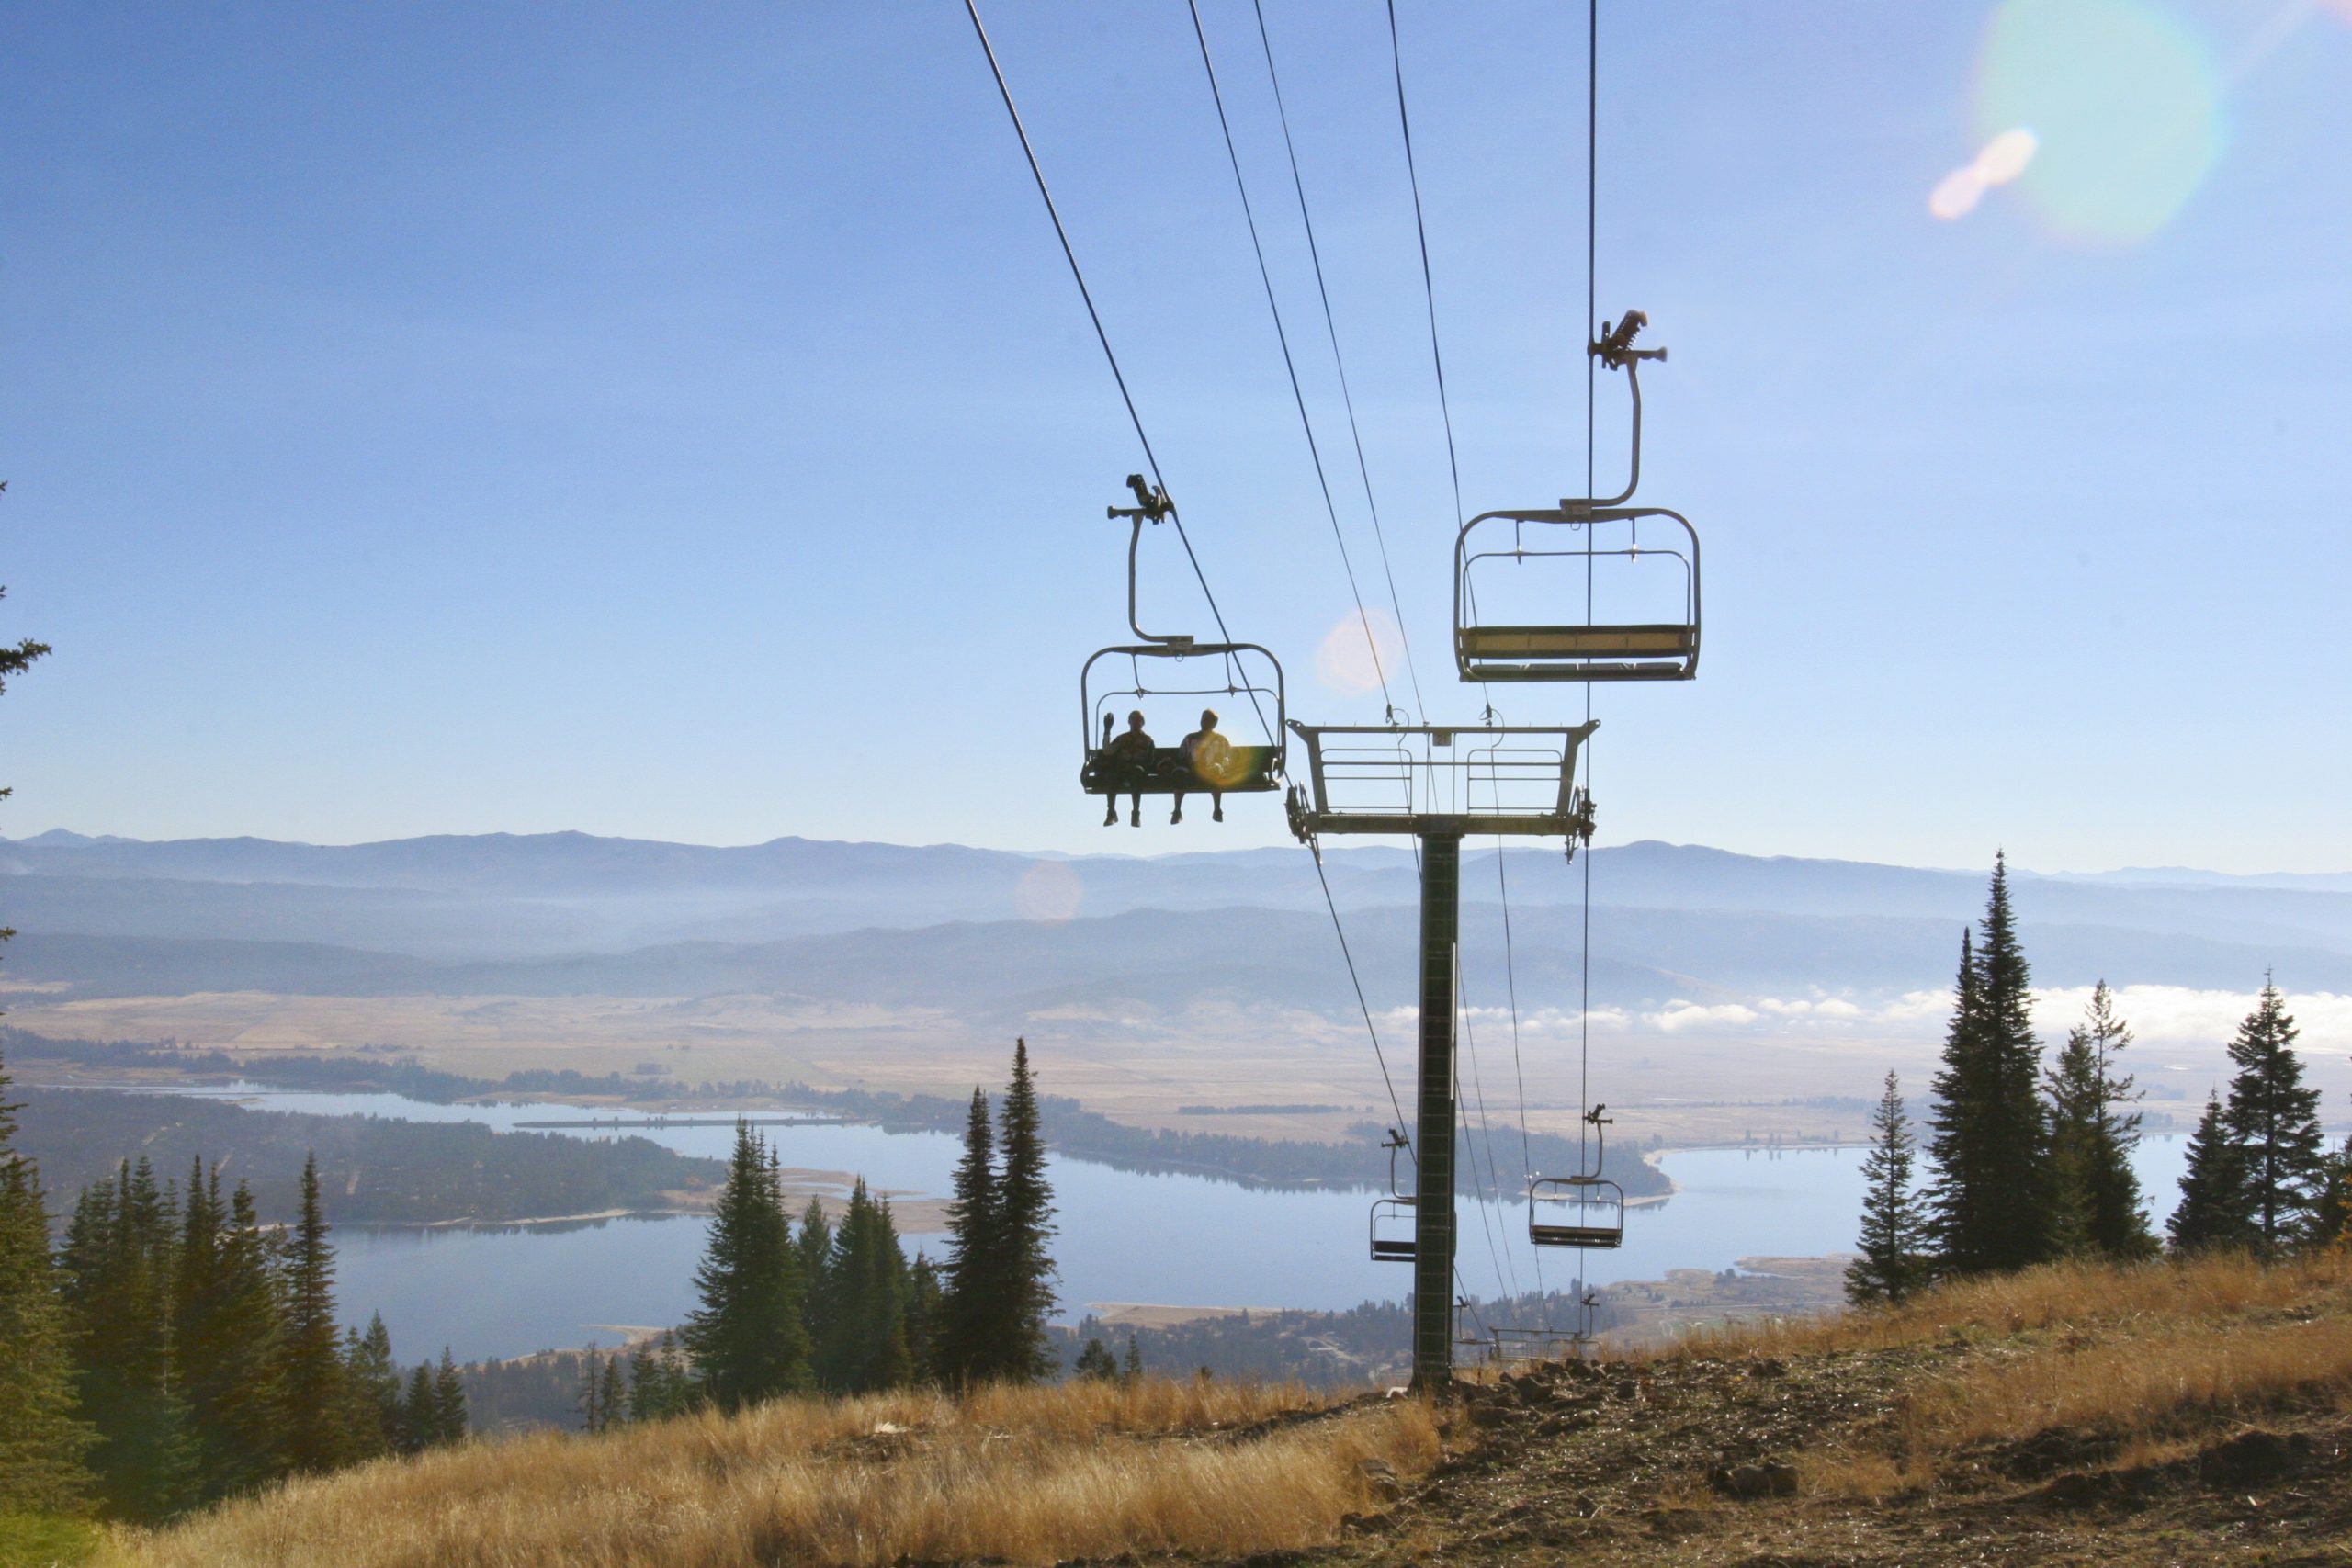 Scenic Chairlift Rides at Tamarack Resort and Brundage Mountain